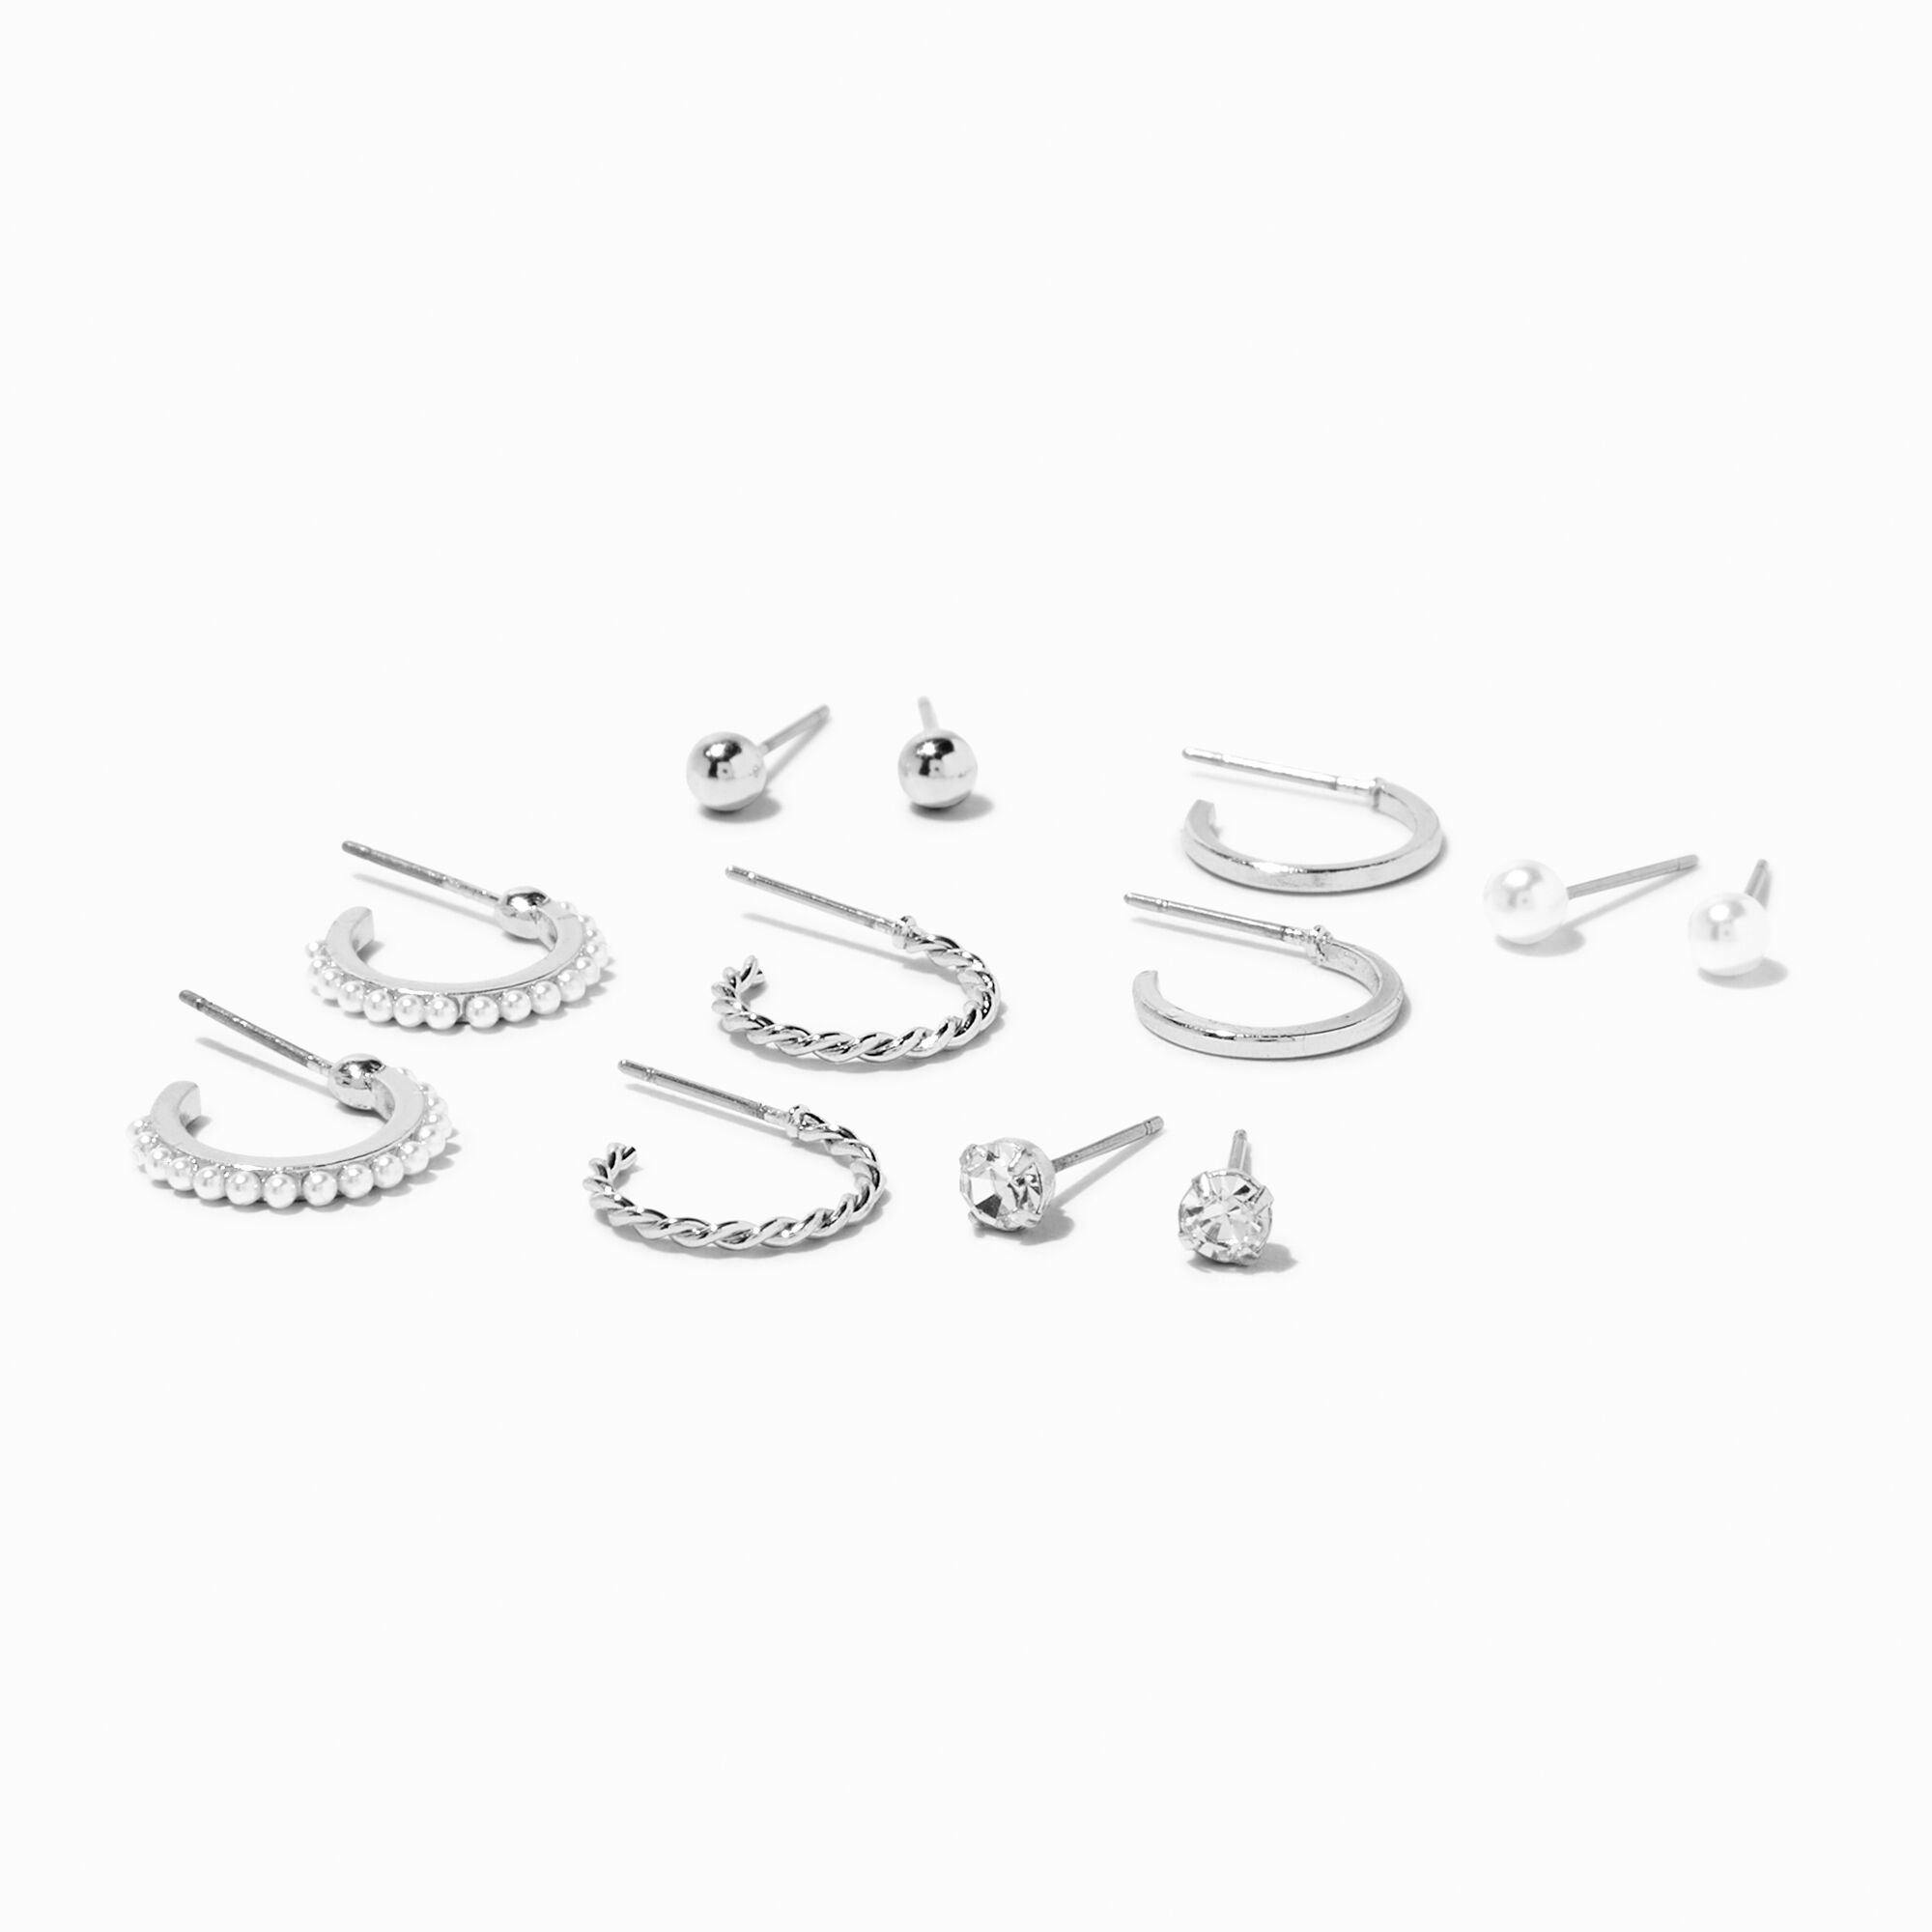 View Claires Tone Crystal Earrings Set 6 Pack Silver information